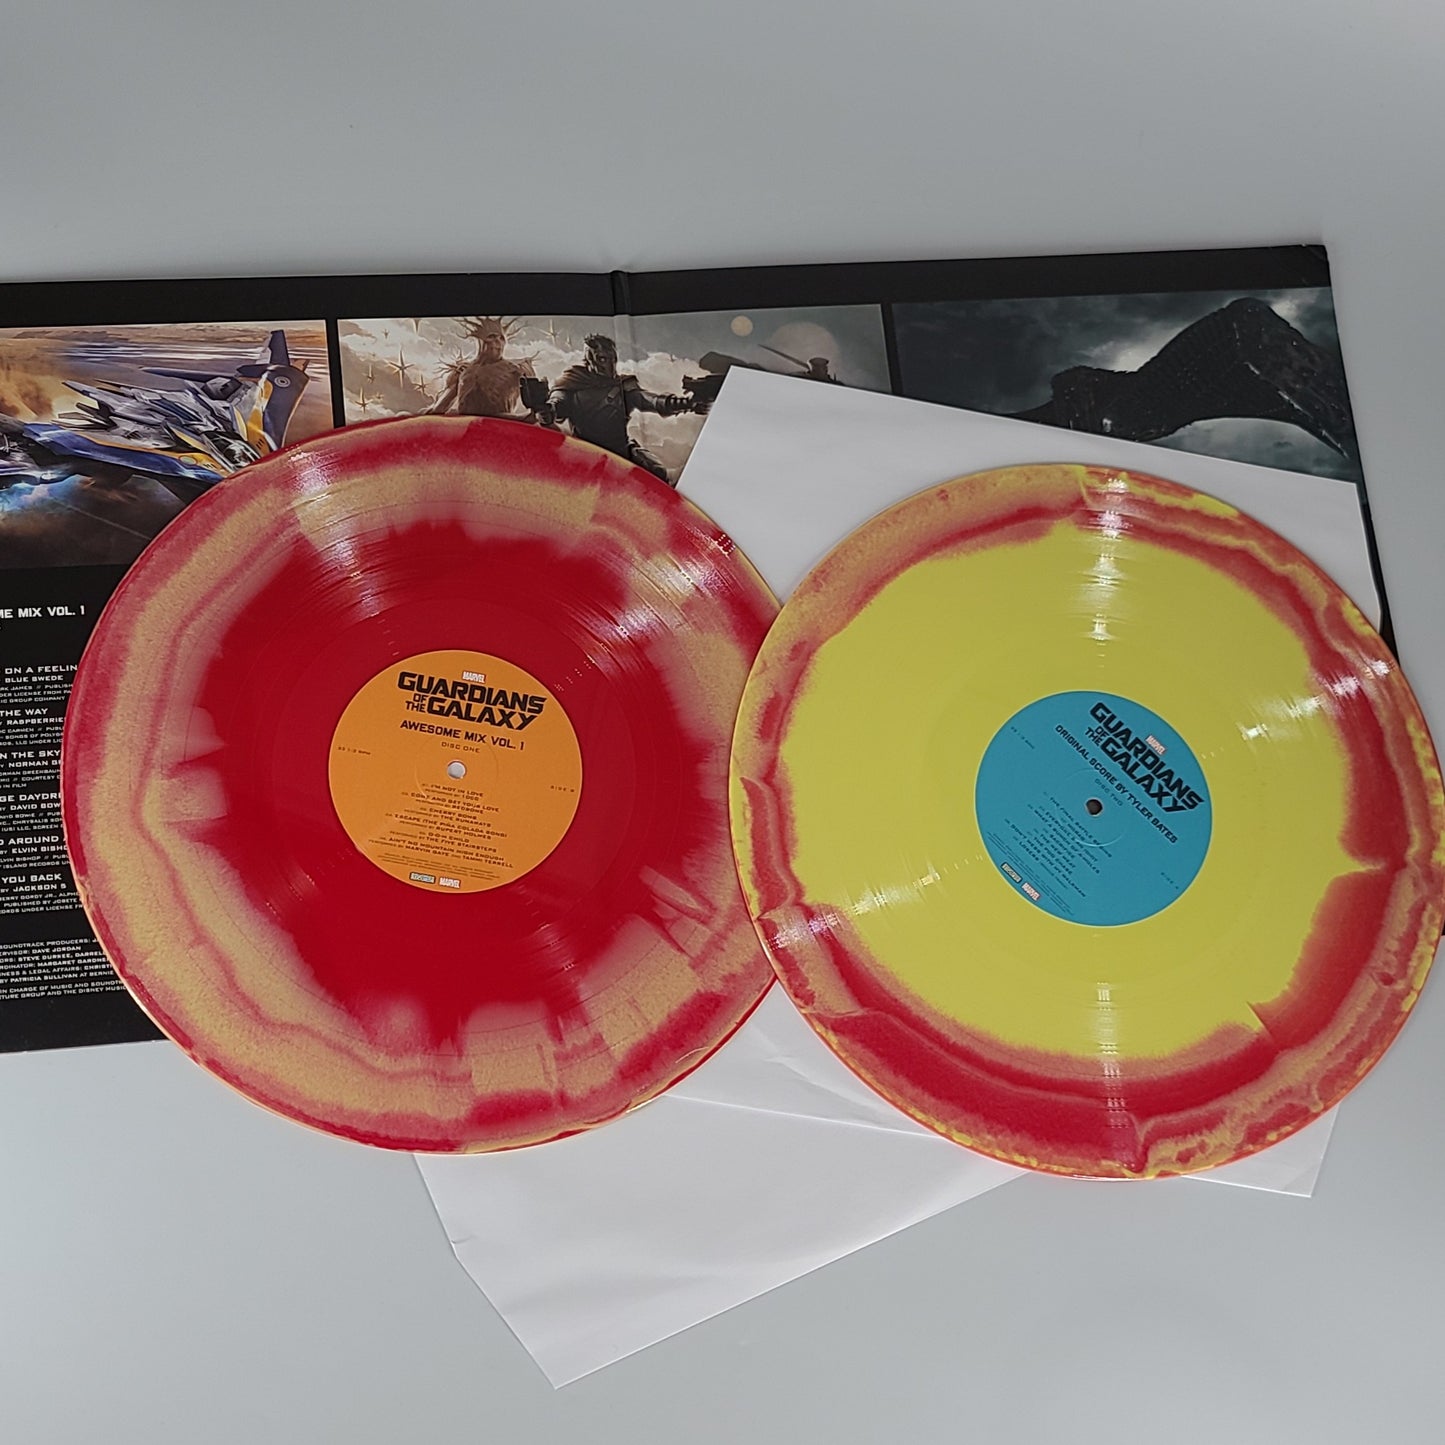 Guardians Of The Galaxy 'Deluxe Edition' Vinyl